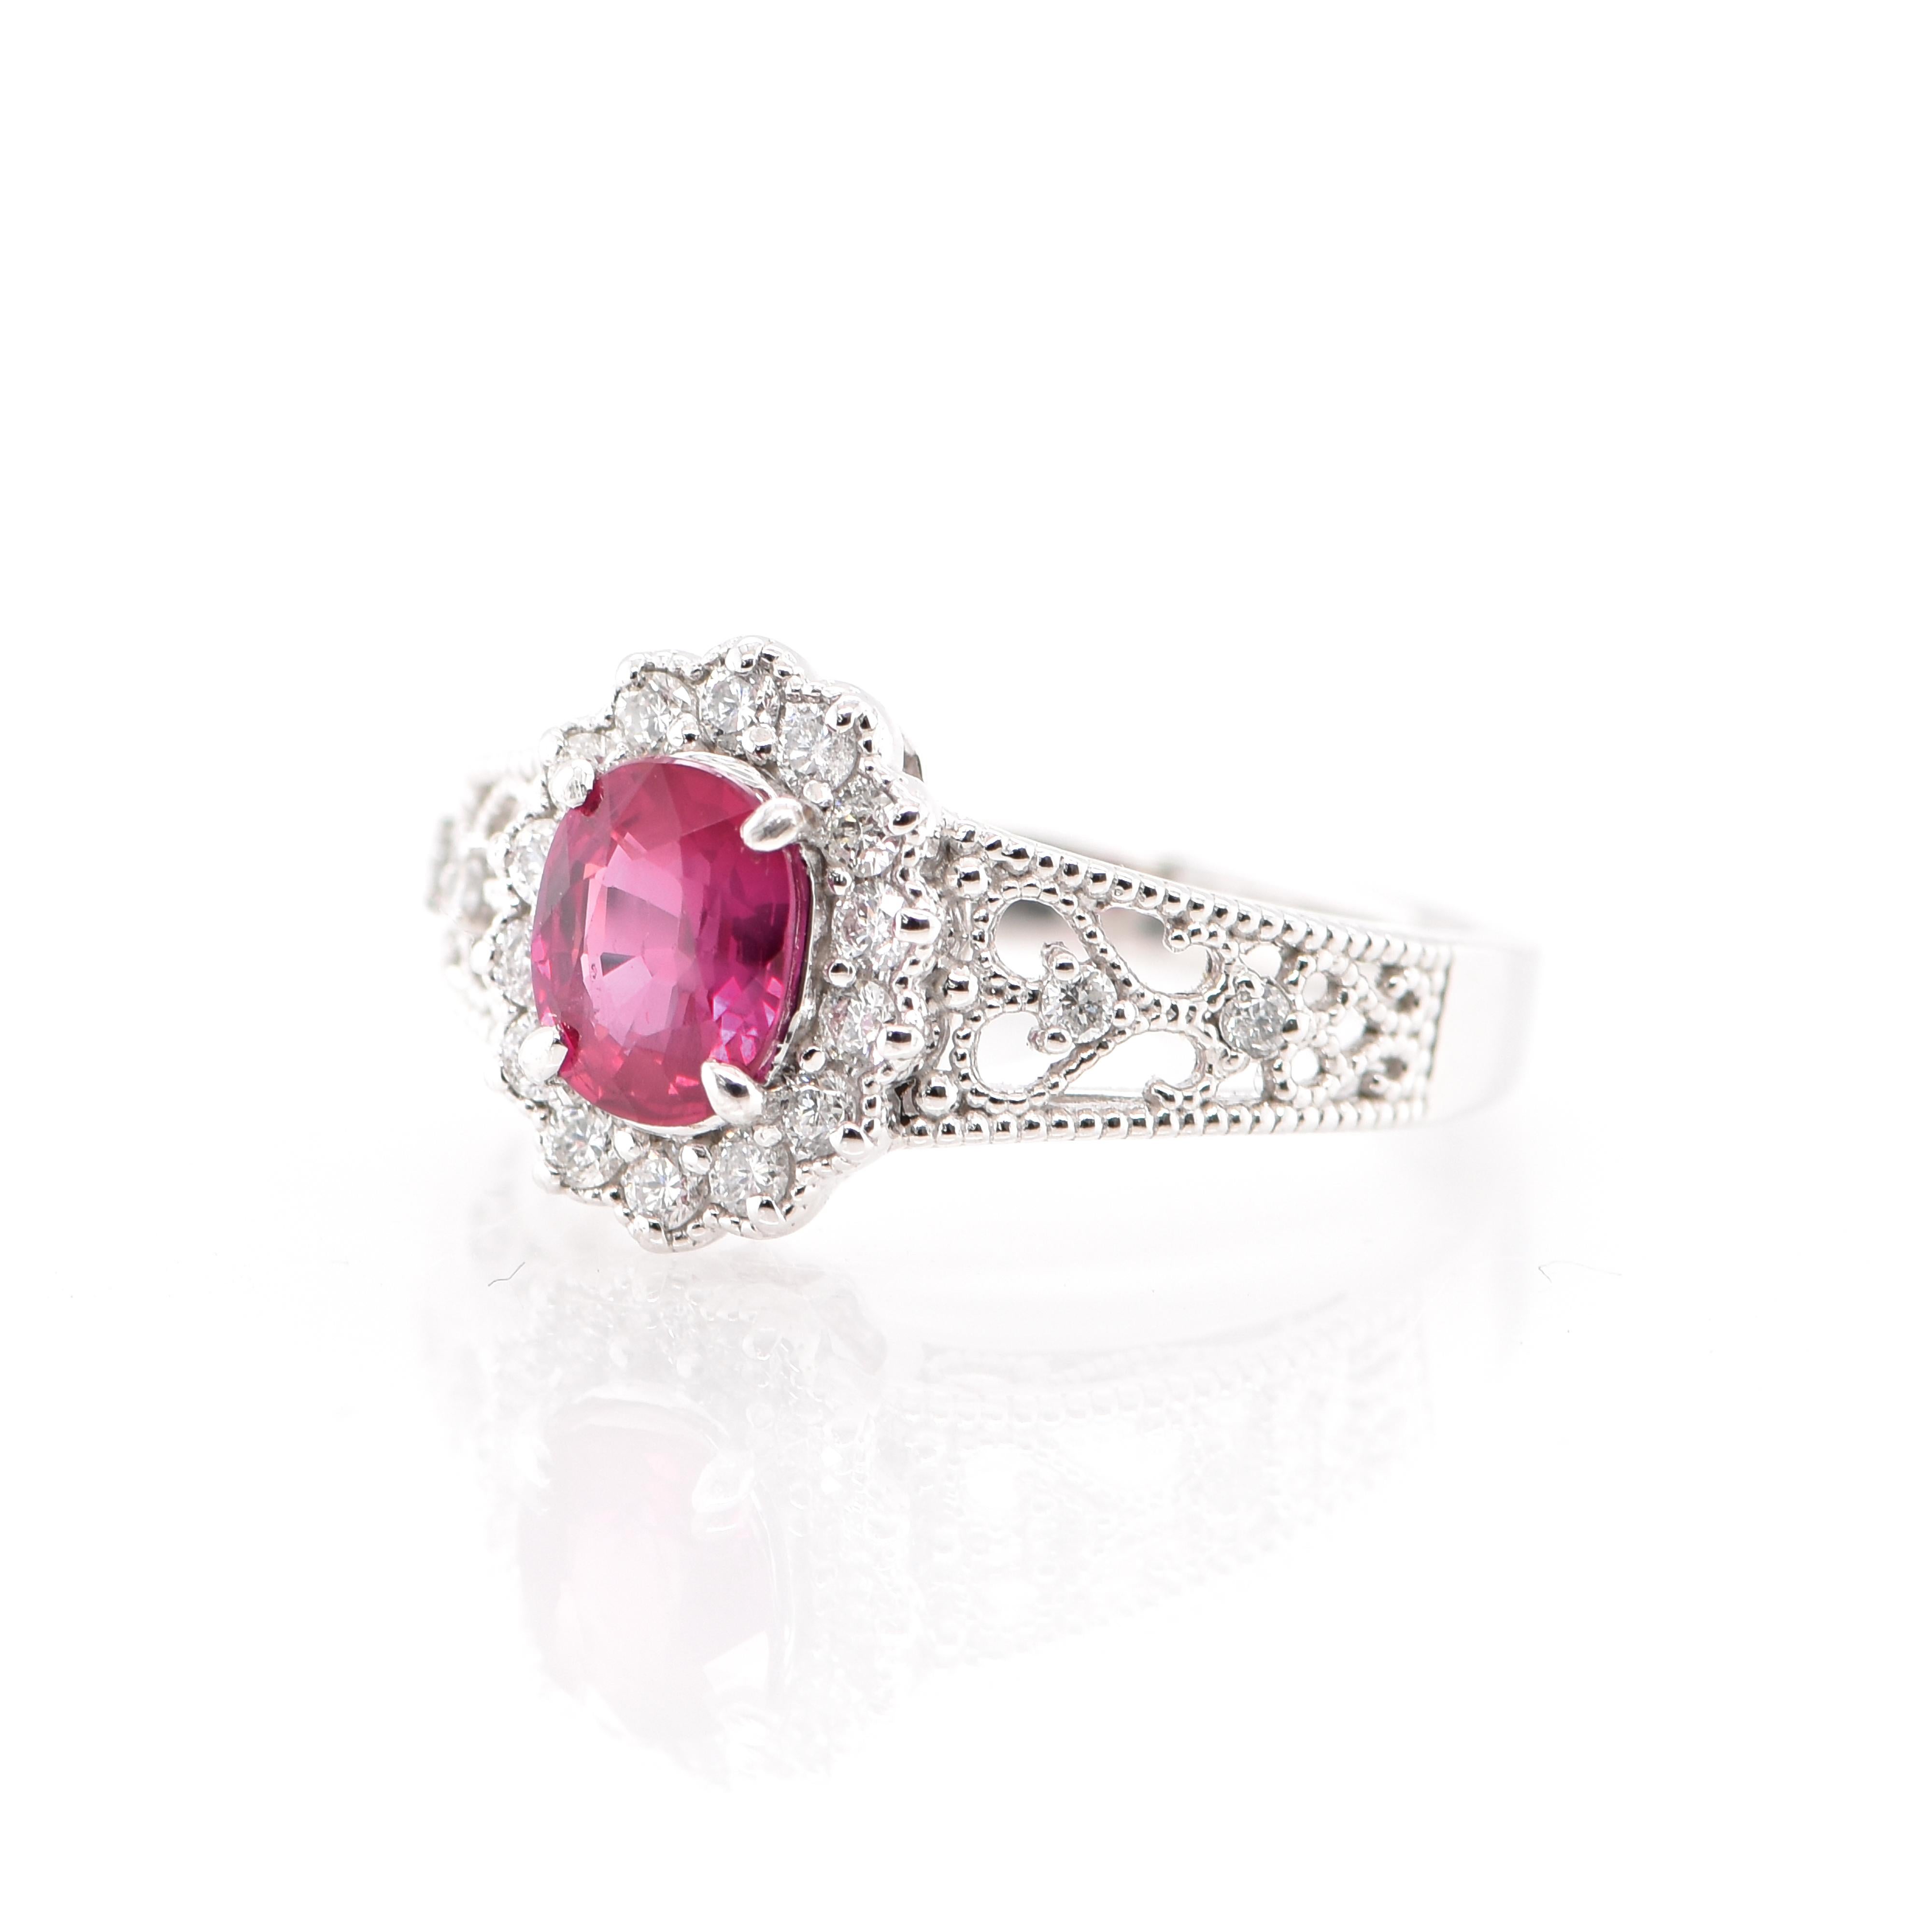 A beautiful Ring featuring a 1.108 Carat No Heat (Untreated) Ruby and 0.30 Carats of Diamond Accents set in Platinum. Rubies are referred to as 